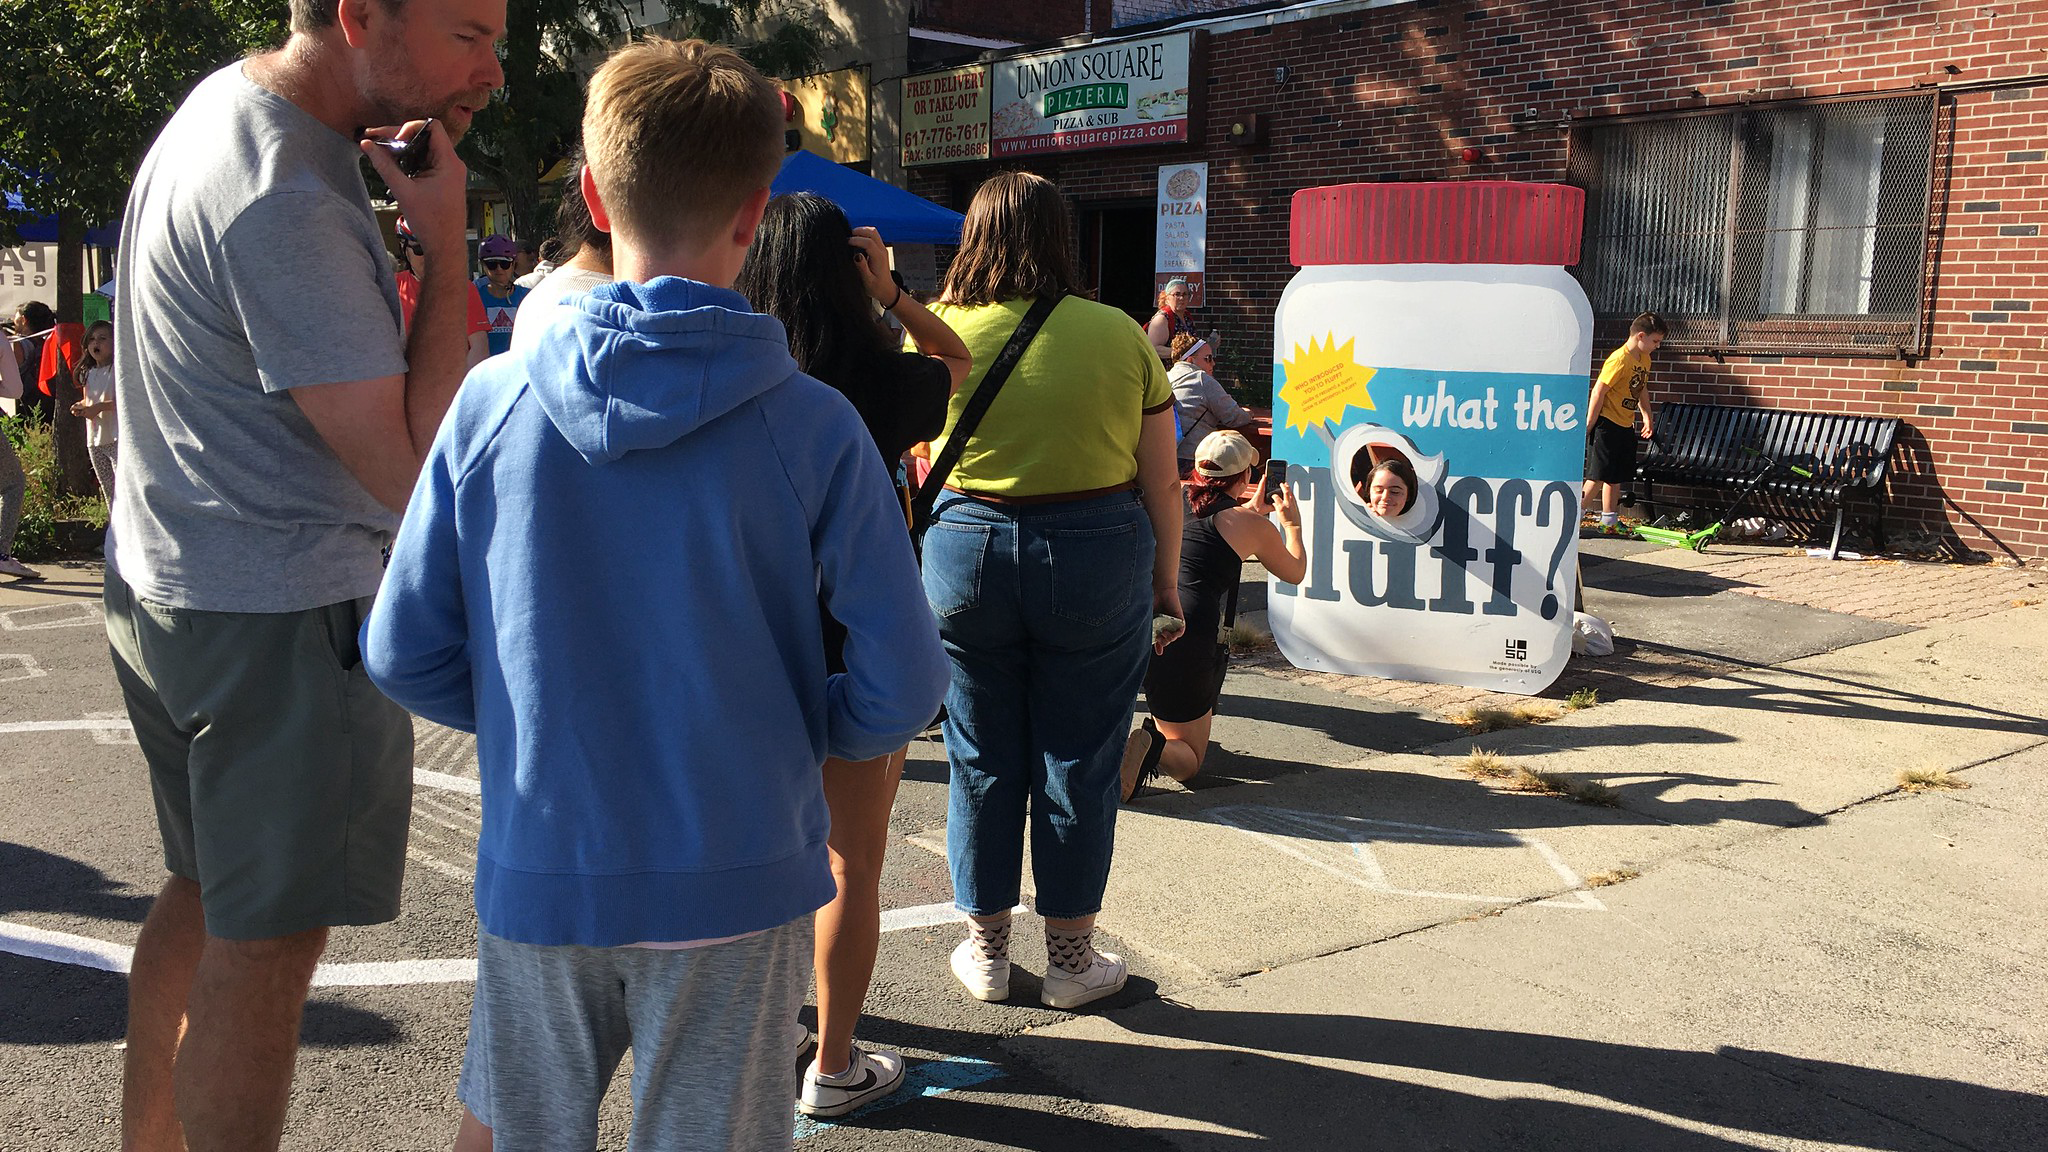 A line of people wait to take photos with a large Fluff Tub